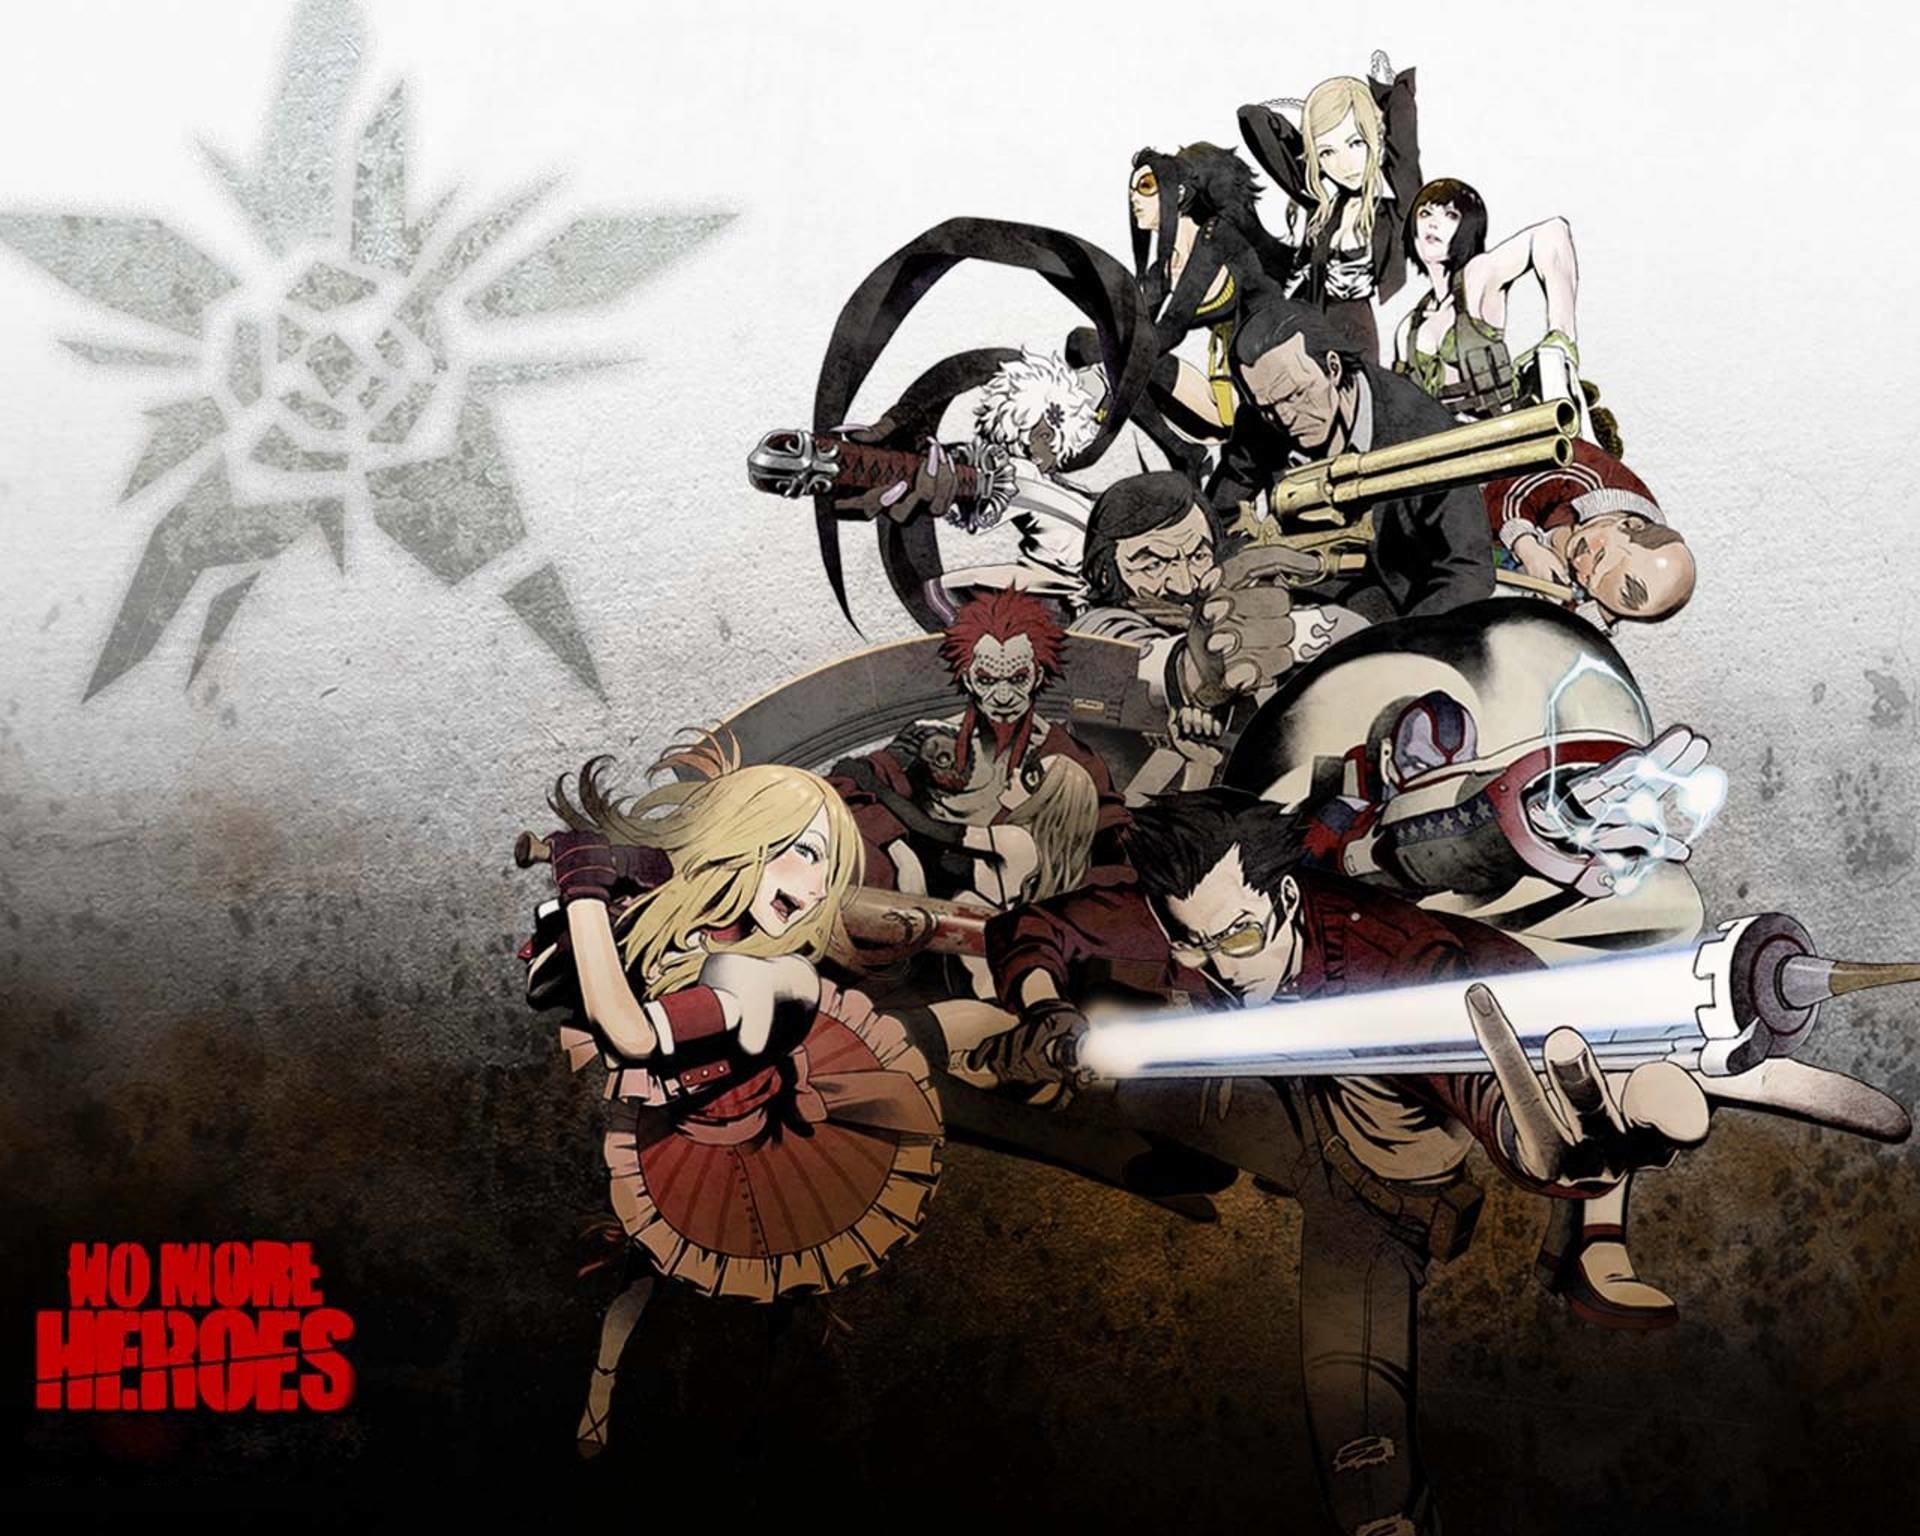 No More Heroes - Travis Strikes Again No More Heroes , HD Wallpaper & Backgrounds